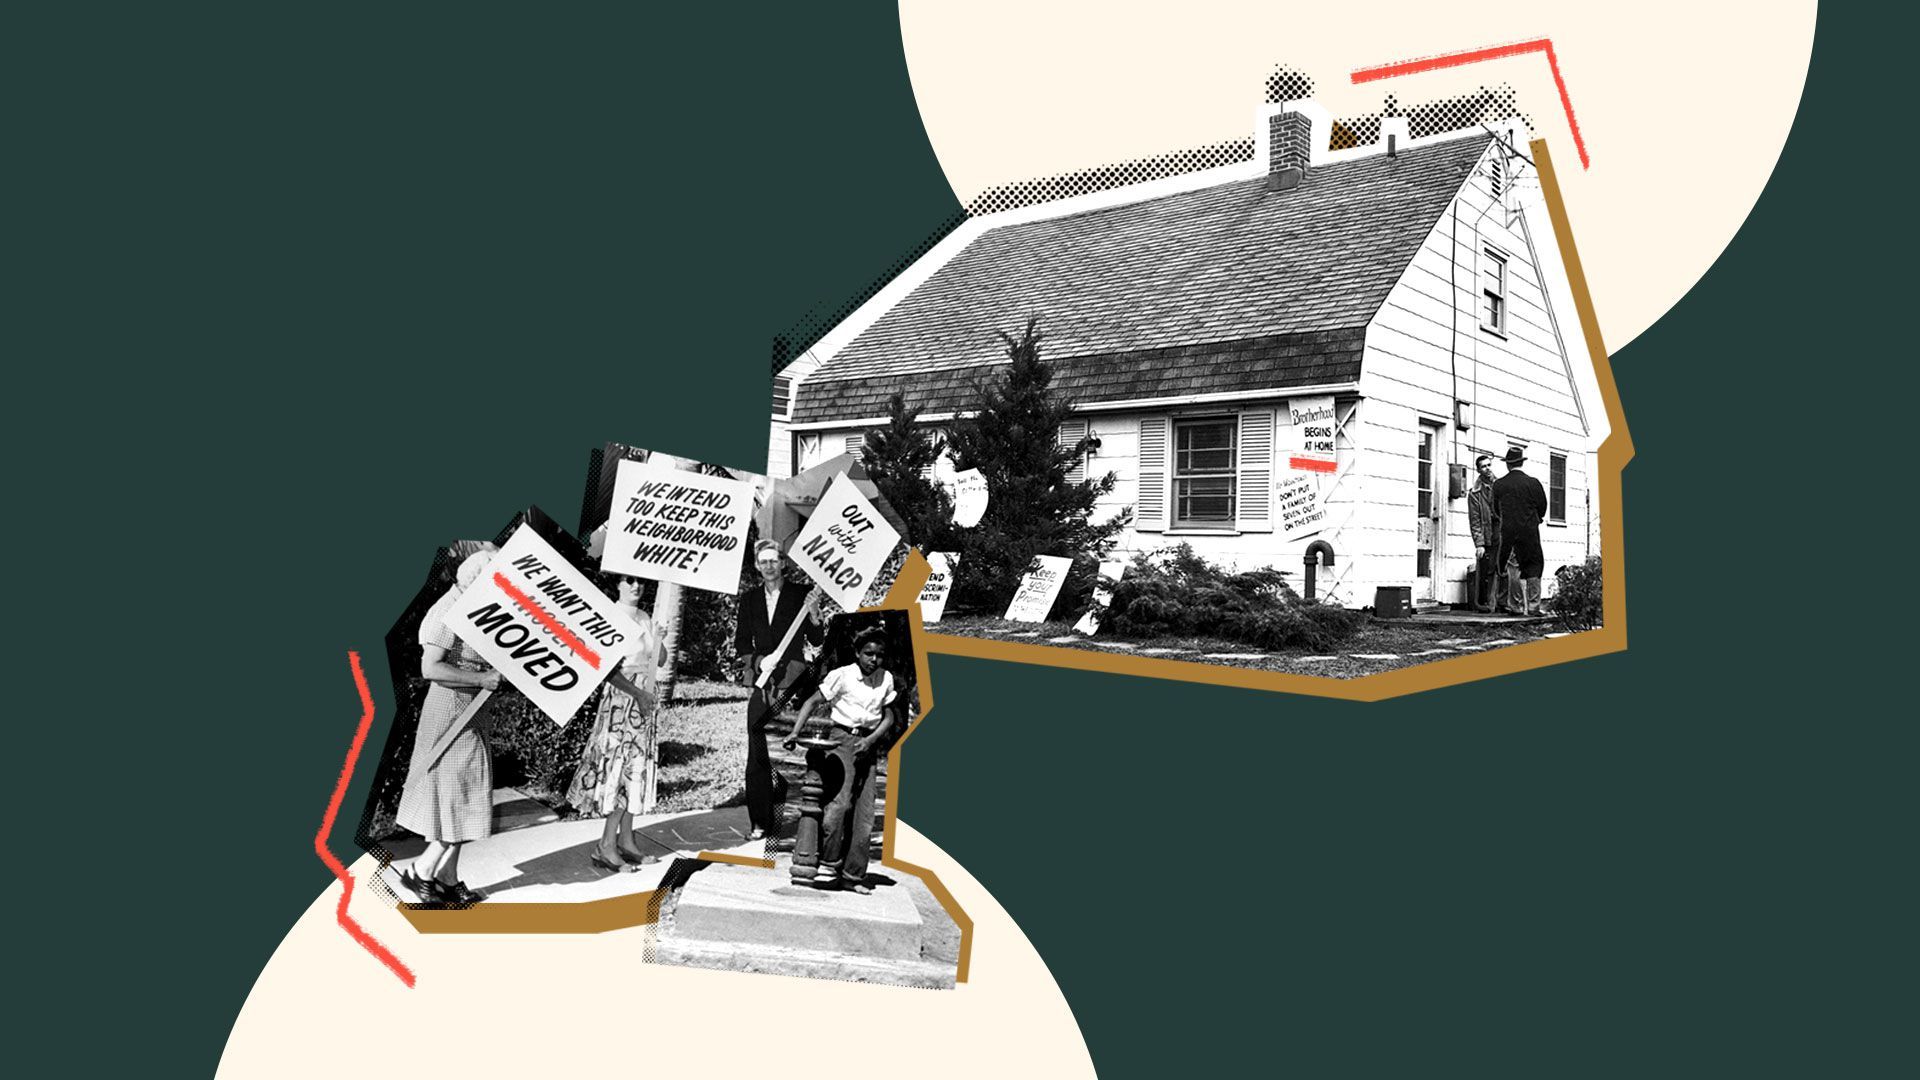 Photo illustration of house with protest signs, people holding racist picket signs, and young boy drinking from a water fountain